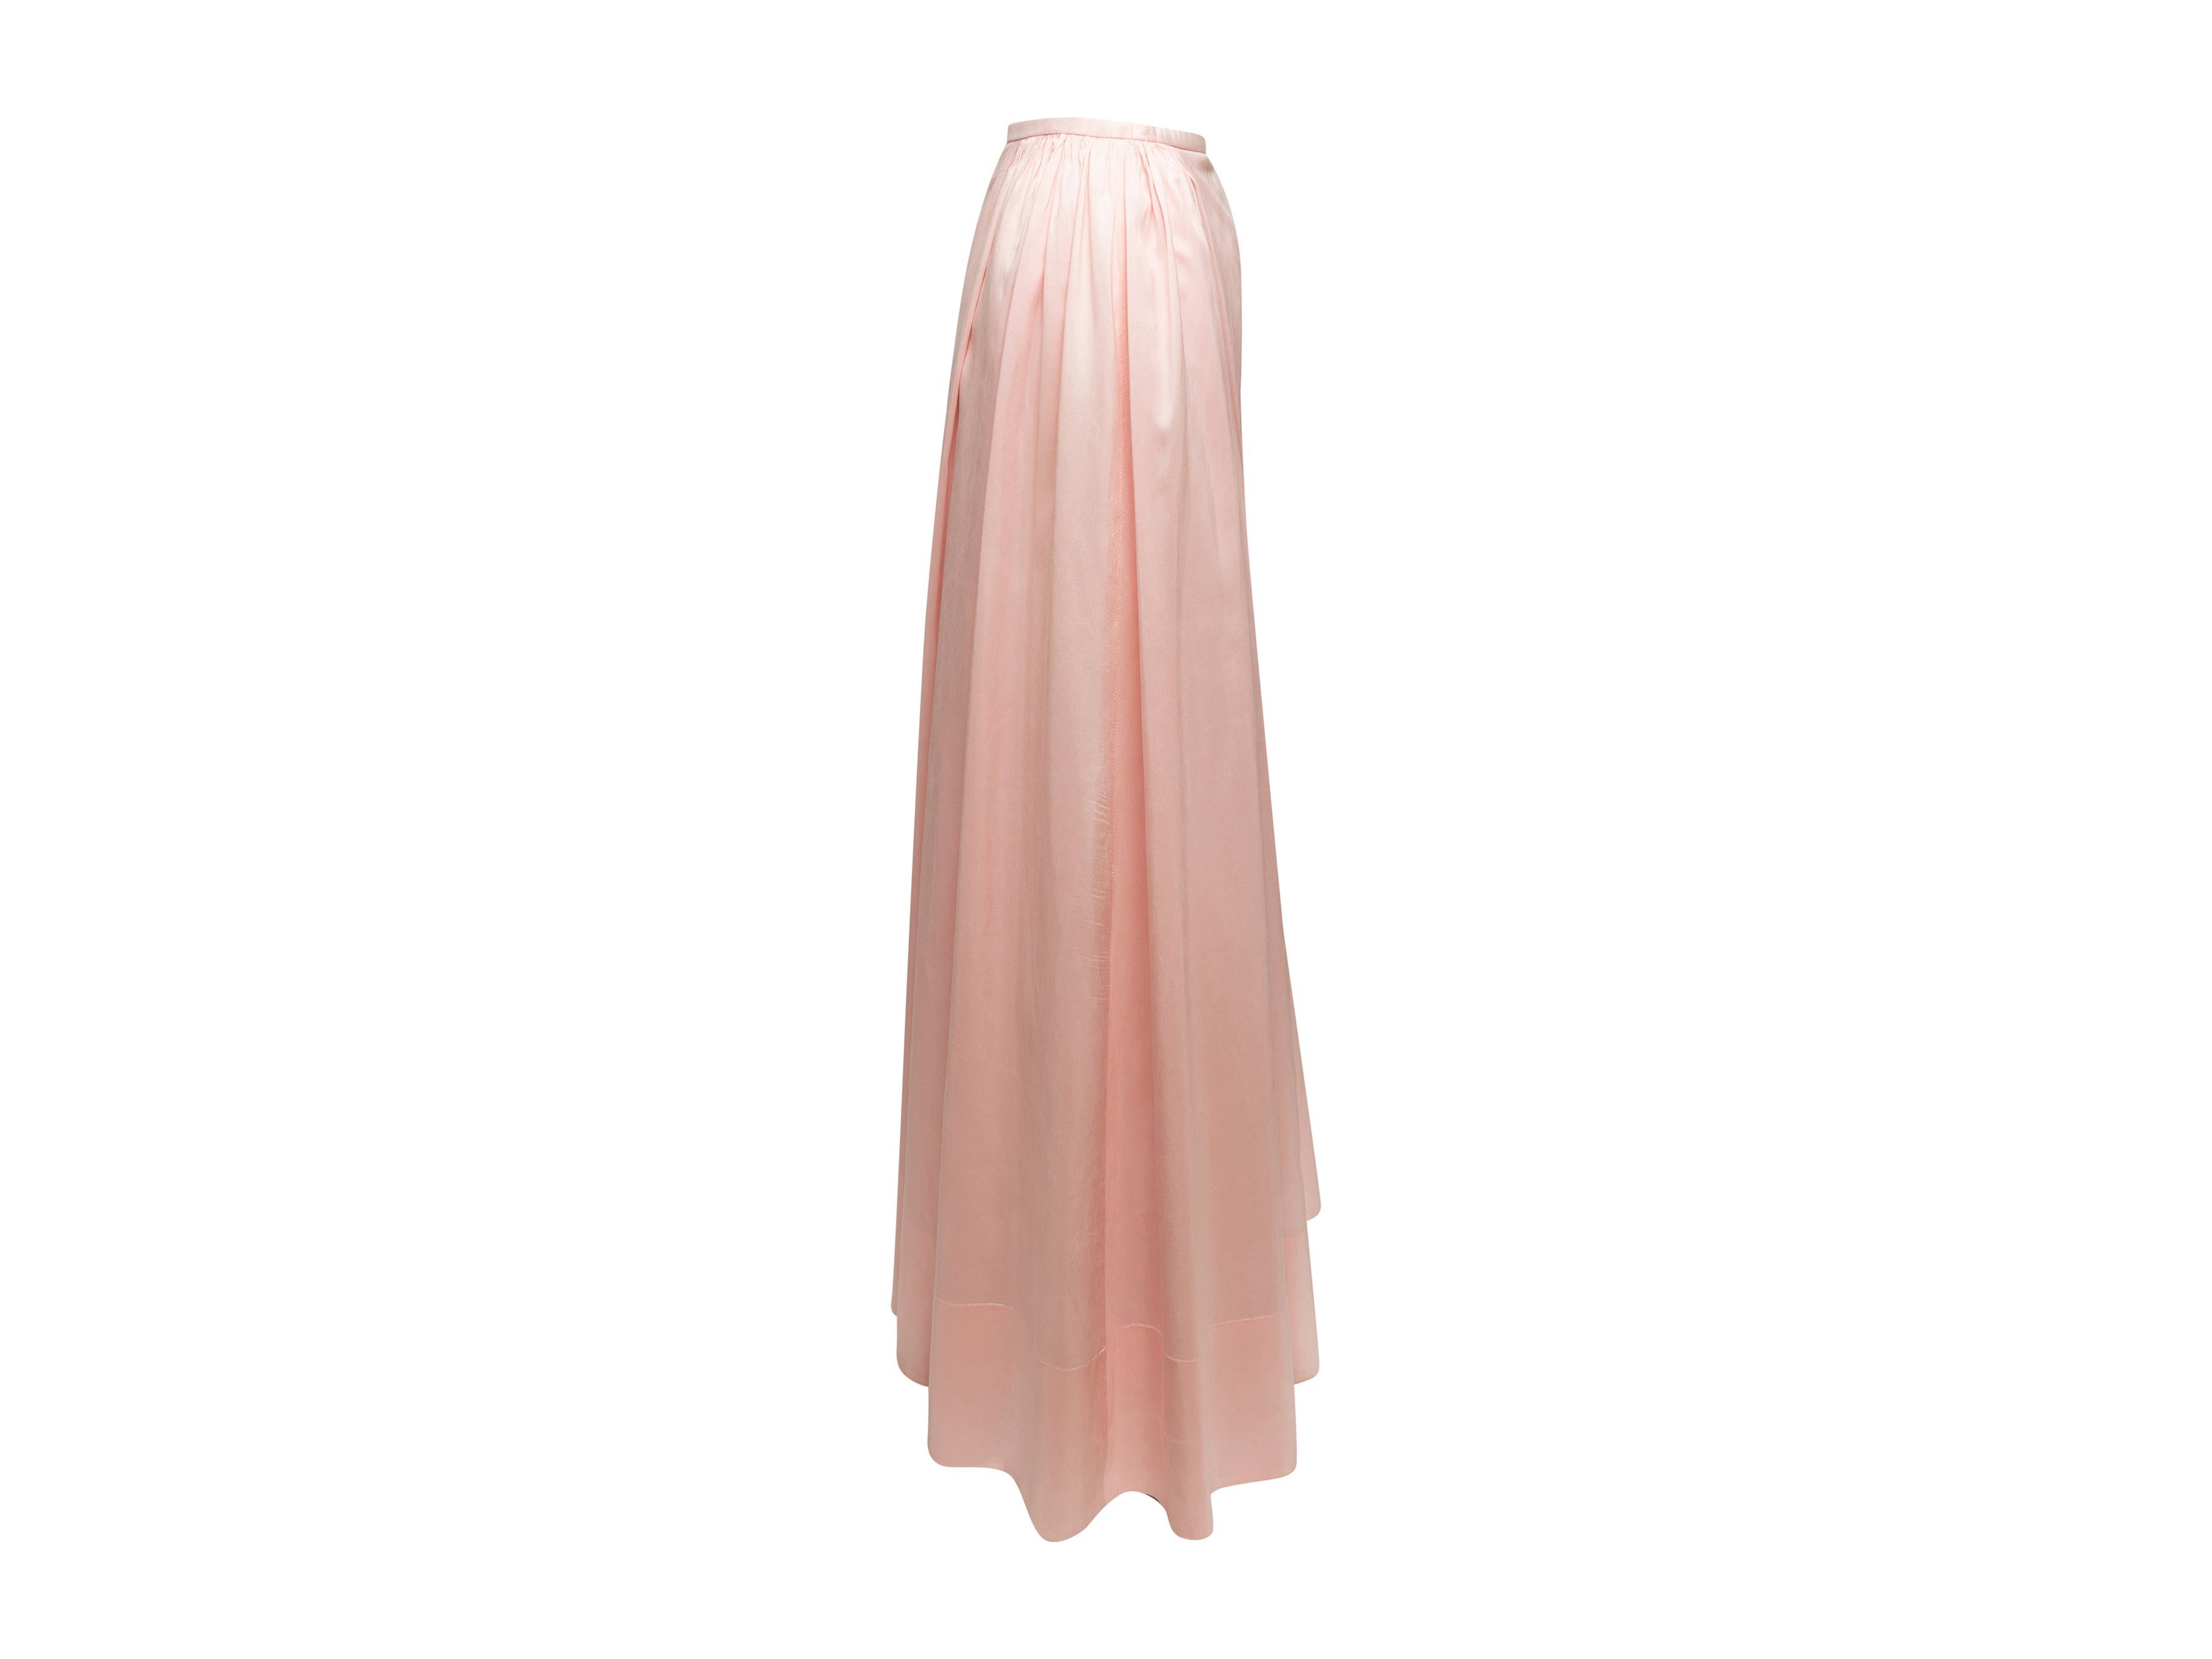 Product details: Blush pink A-line maxi skirt by Burberry. Pleating at hips. Zip closure at side. Designer size 14. 27